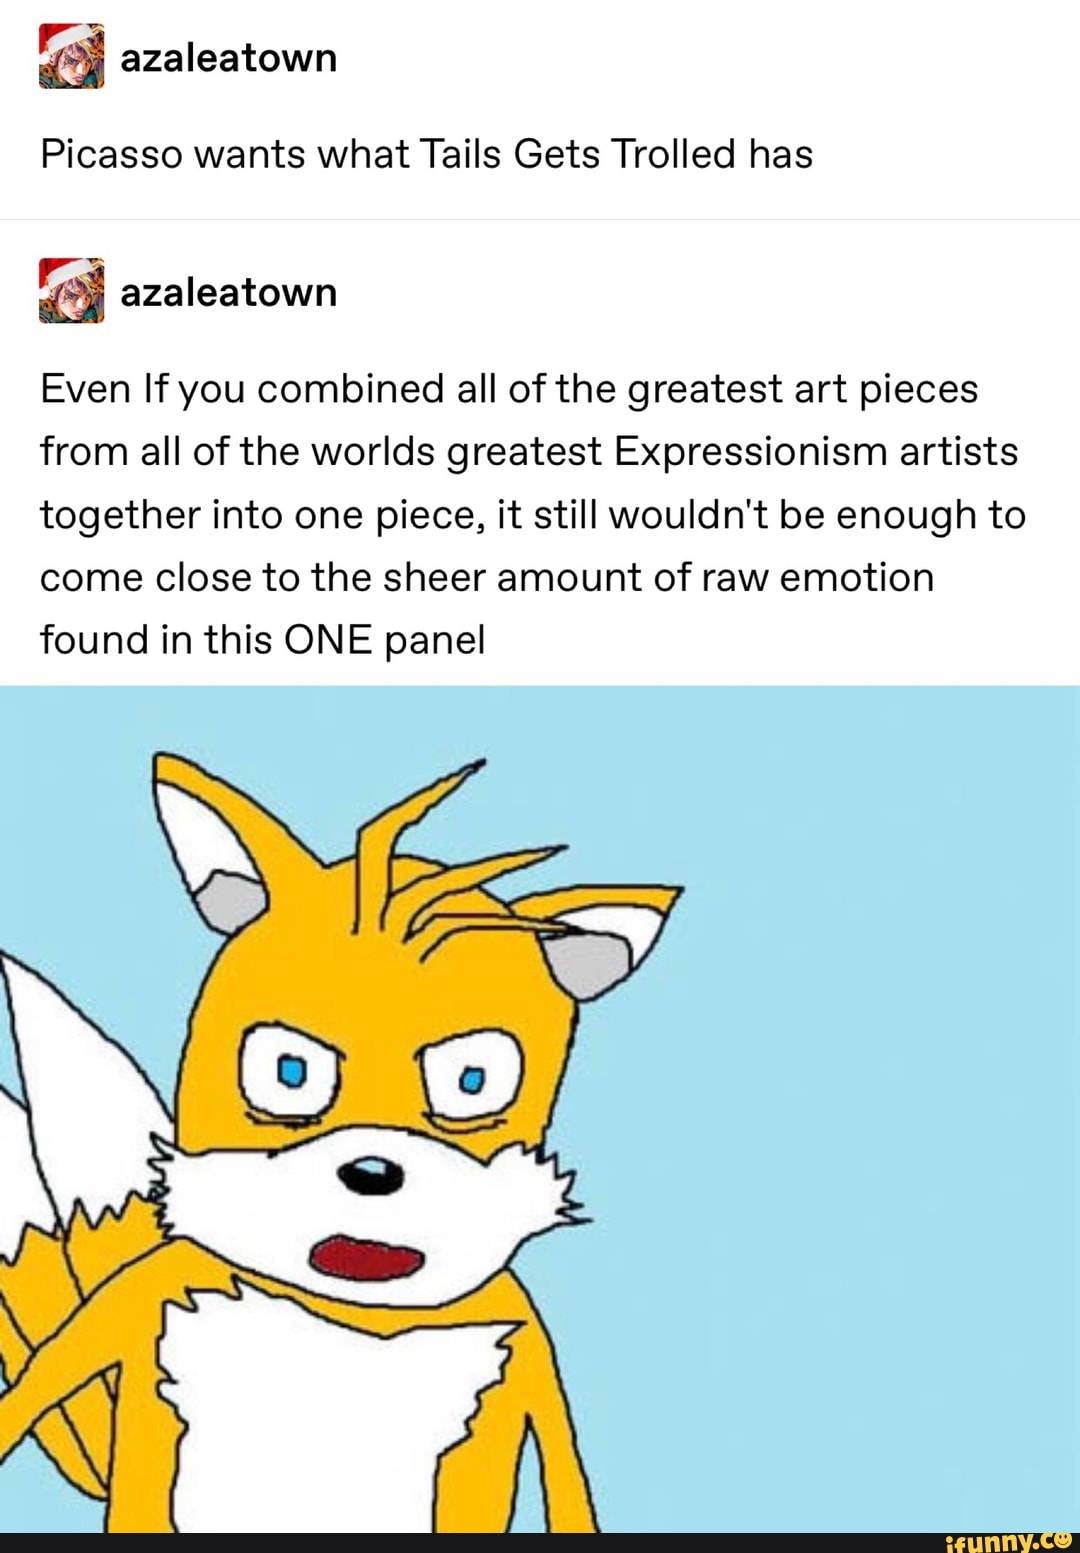 Picasso Wants What Tails Gets Trolled Has A Azaleatown Even If You